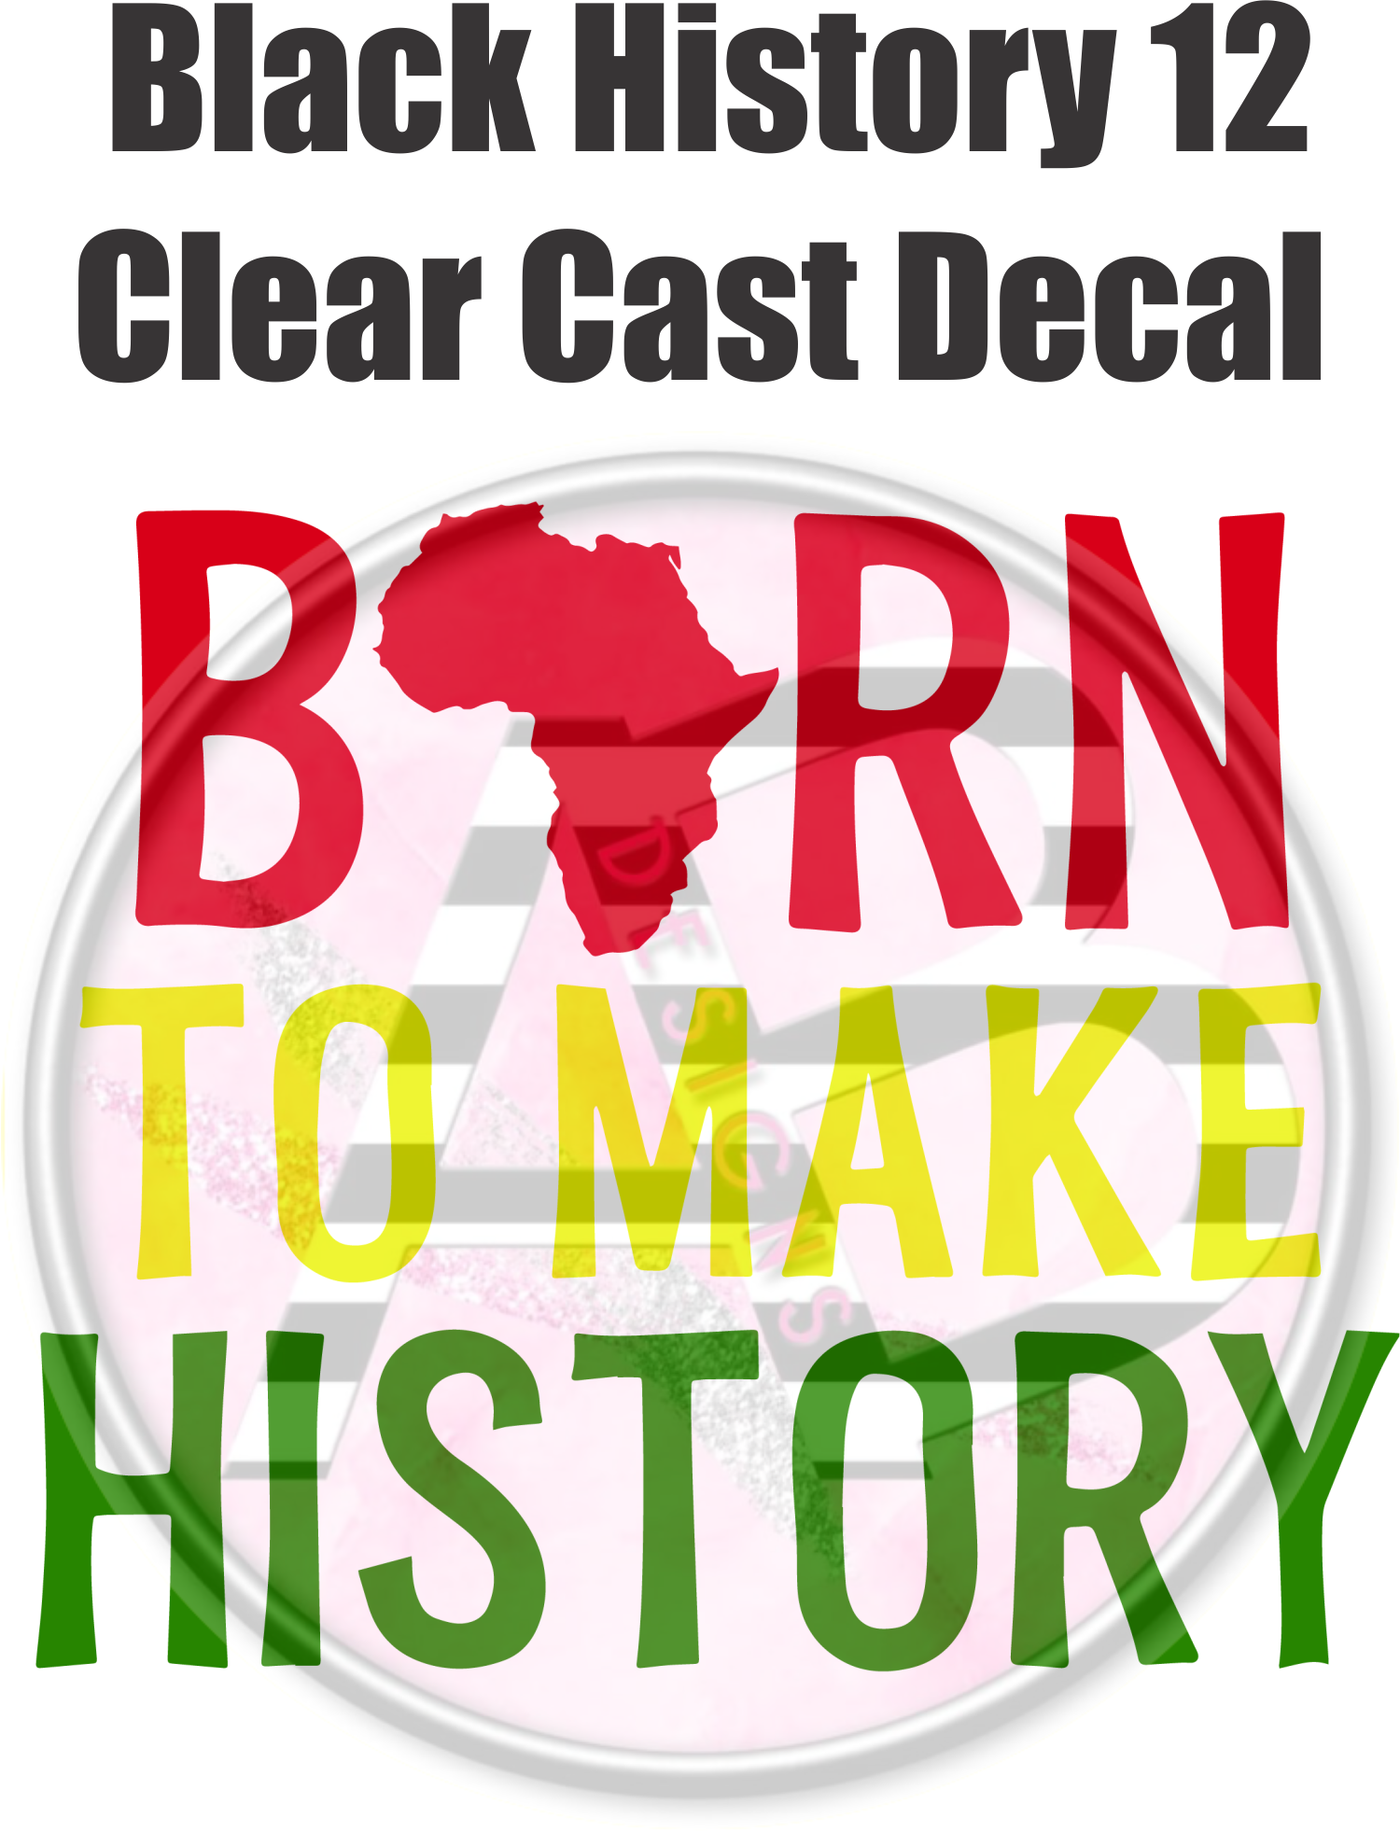 Black History 12 - Clear Cast Decal